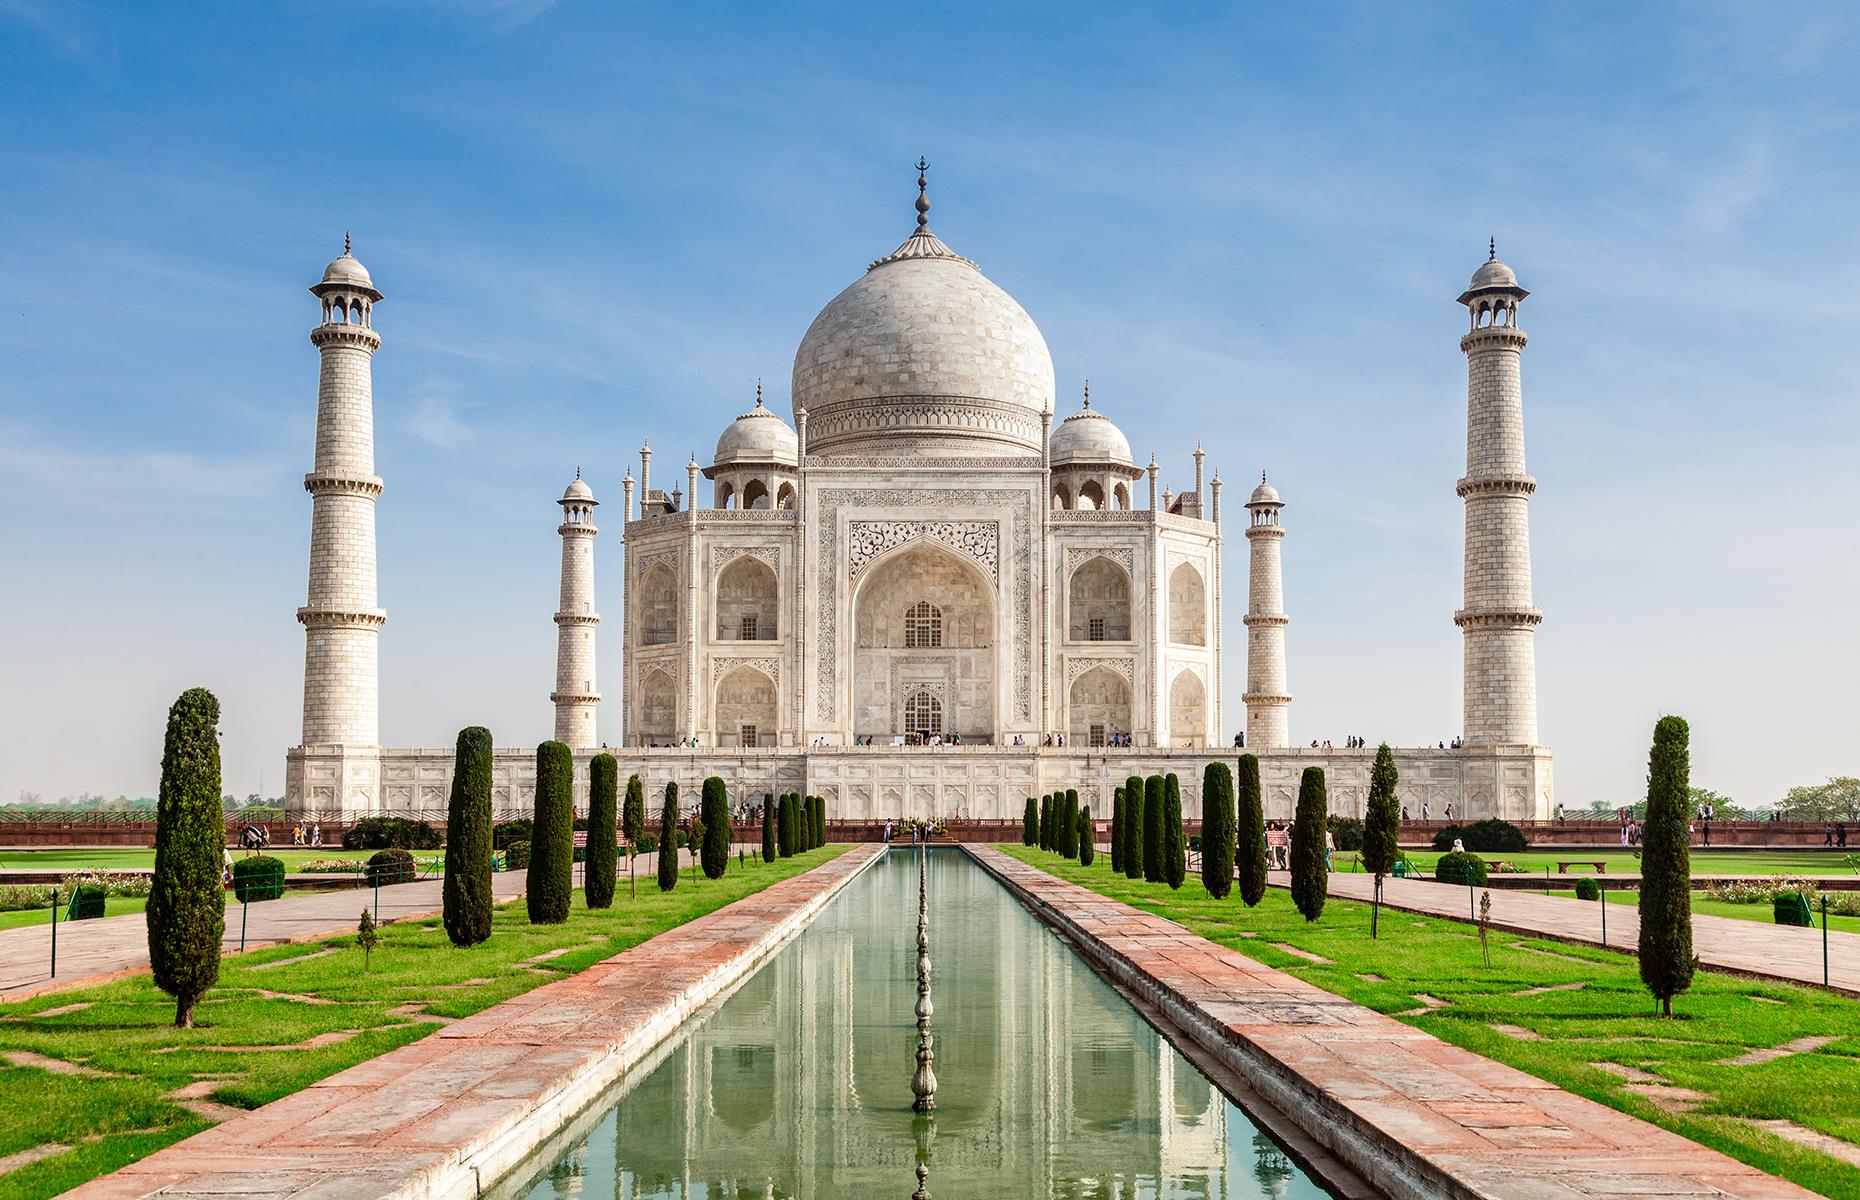 <p>It may be top of the roll call of India’s sights, but it’s no less beautiful for all its hype. Arrive at sunrise for the best light or visit on a full moon to see the translucent Makrana marble of this vast mausoleum bathed in moonlight.</p>  <p>Yes, you’ll be vying for a spot with coachloads of tourists but you’ll not fail to be struck by the beauty of this world wonder.</p>